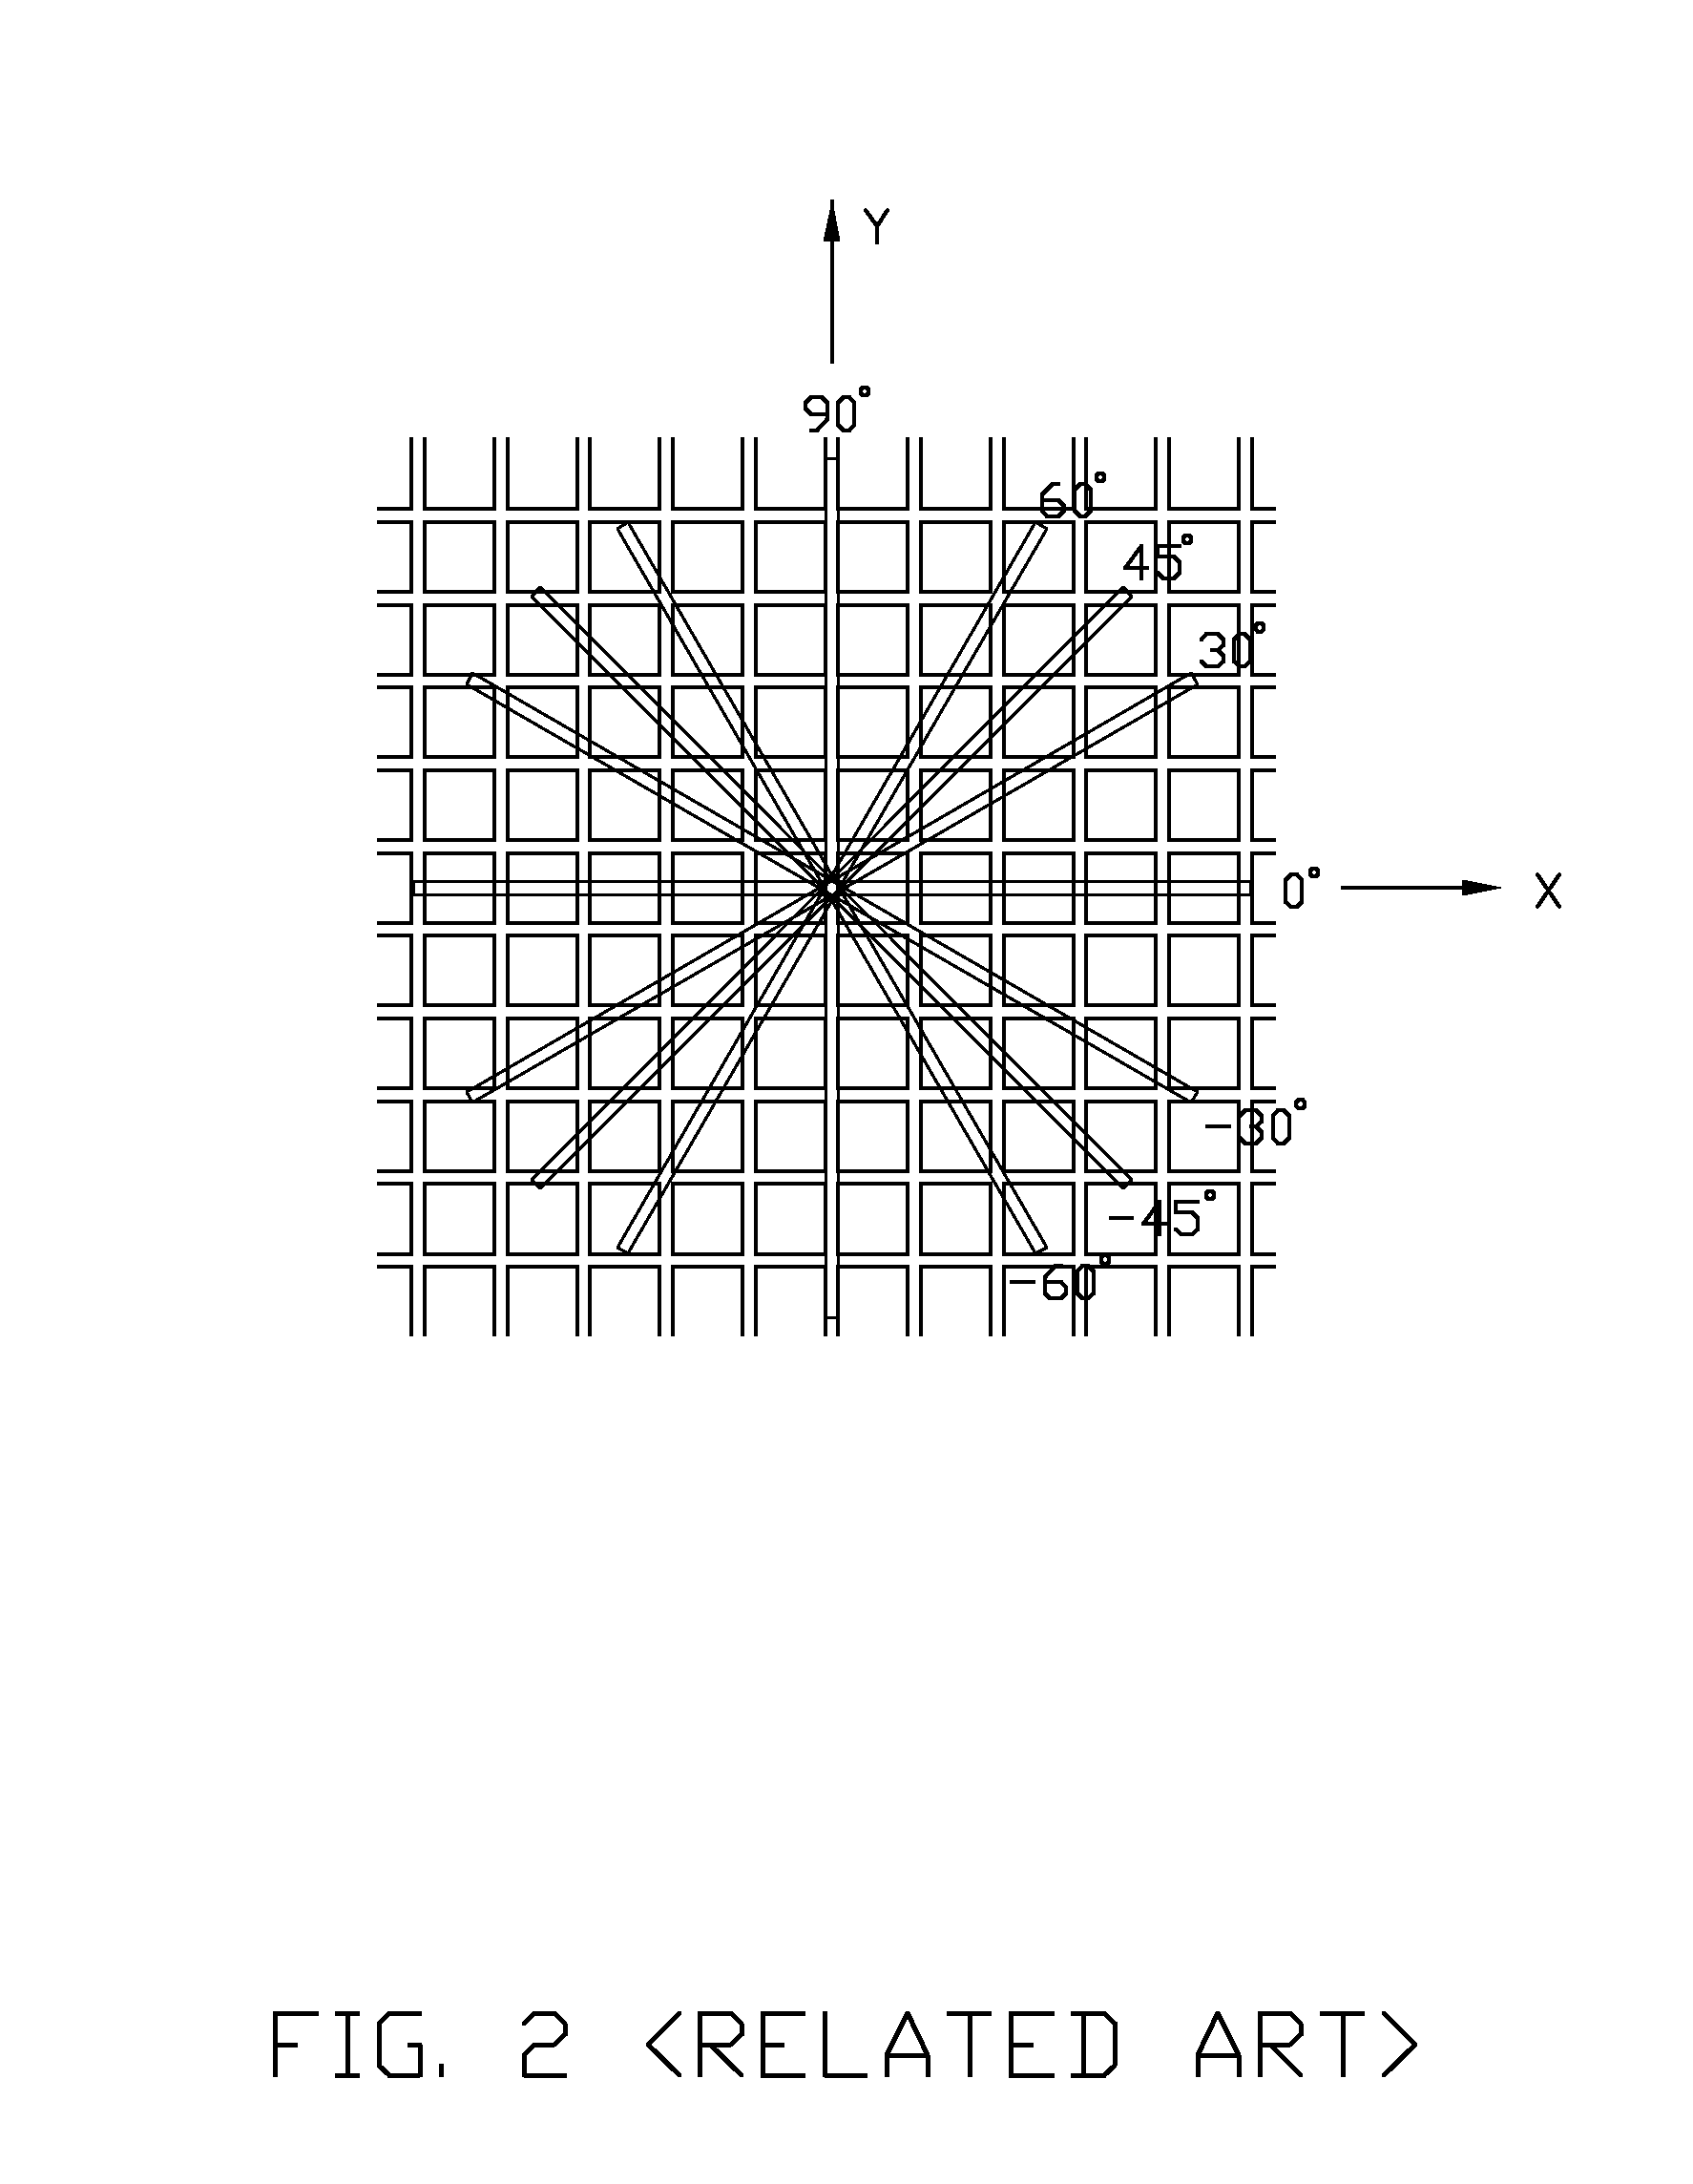 Circuit board with improved ground plane